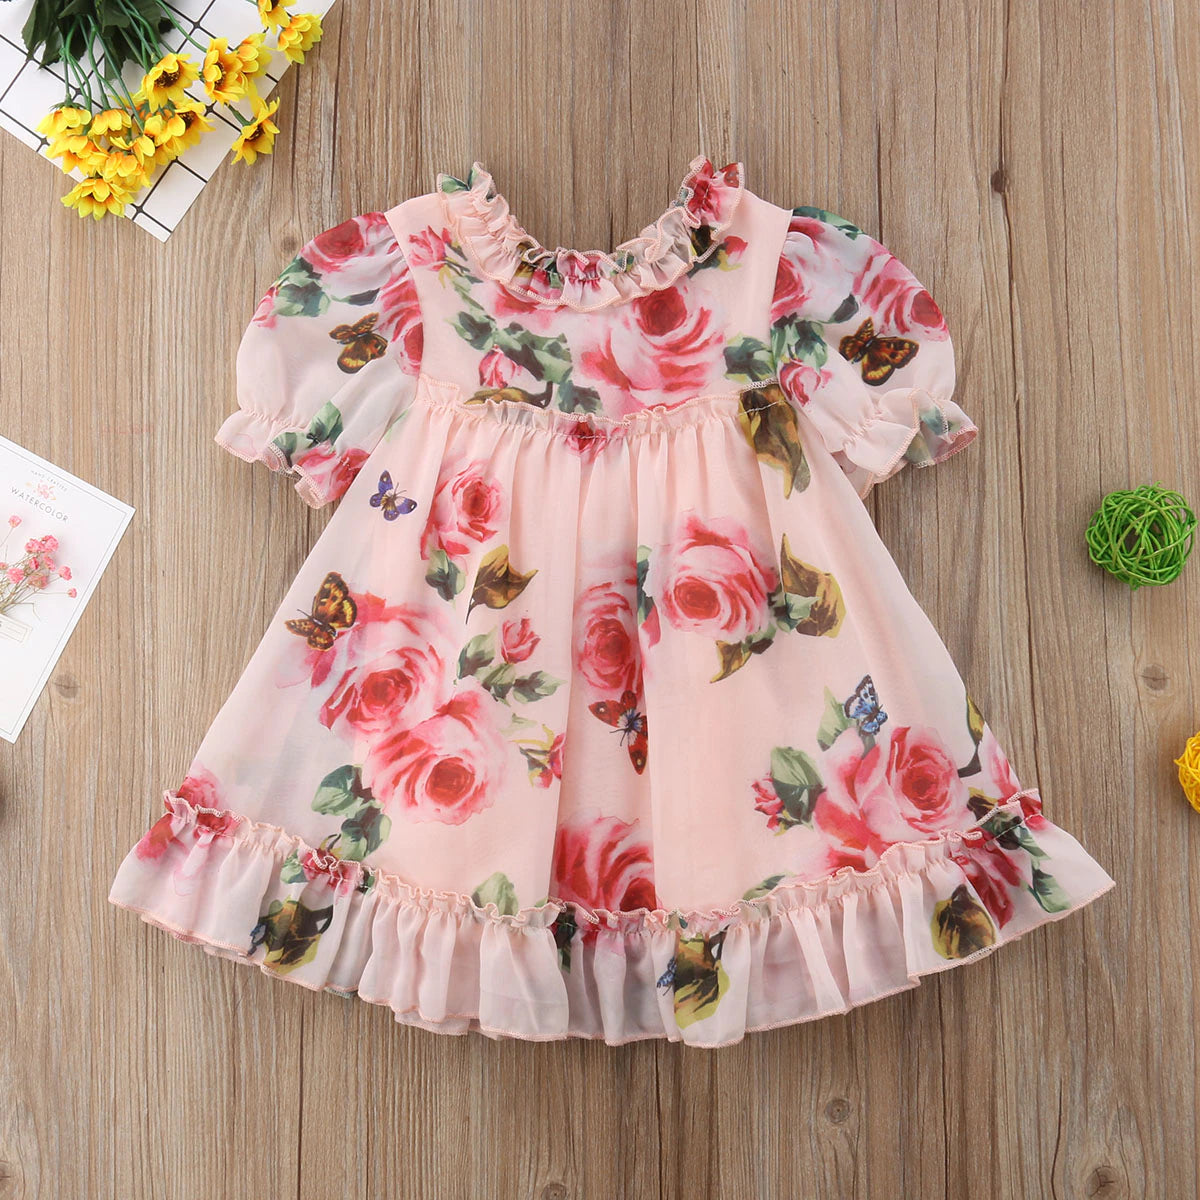 Adorable Baby Girls Clothes: Flower Puff Sleeves a-Line Dress for Holiday Parties for Baby Girls